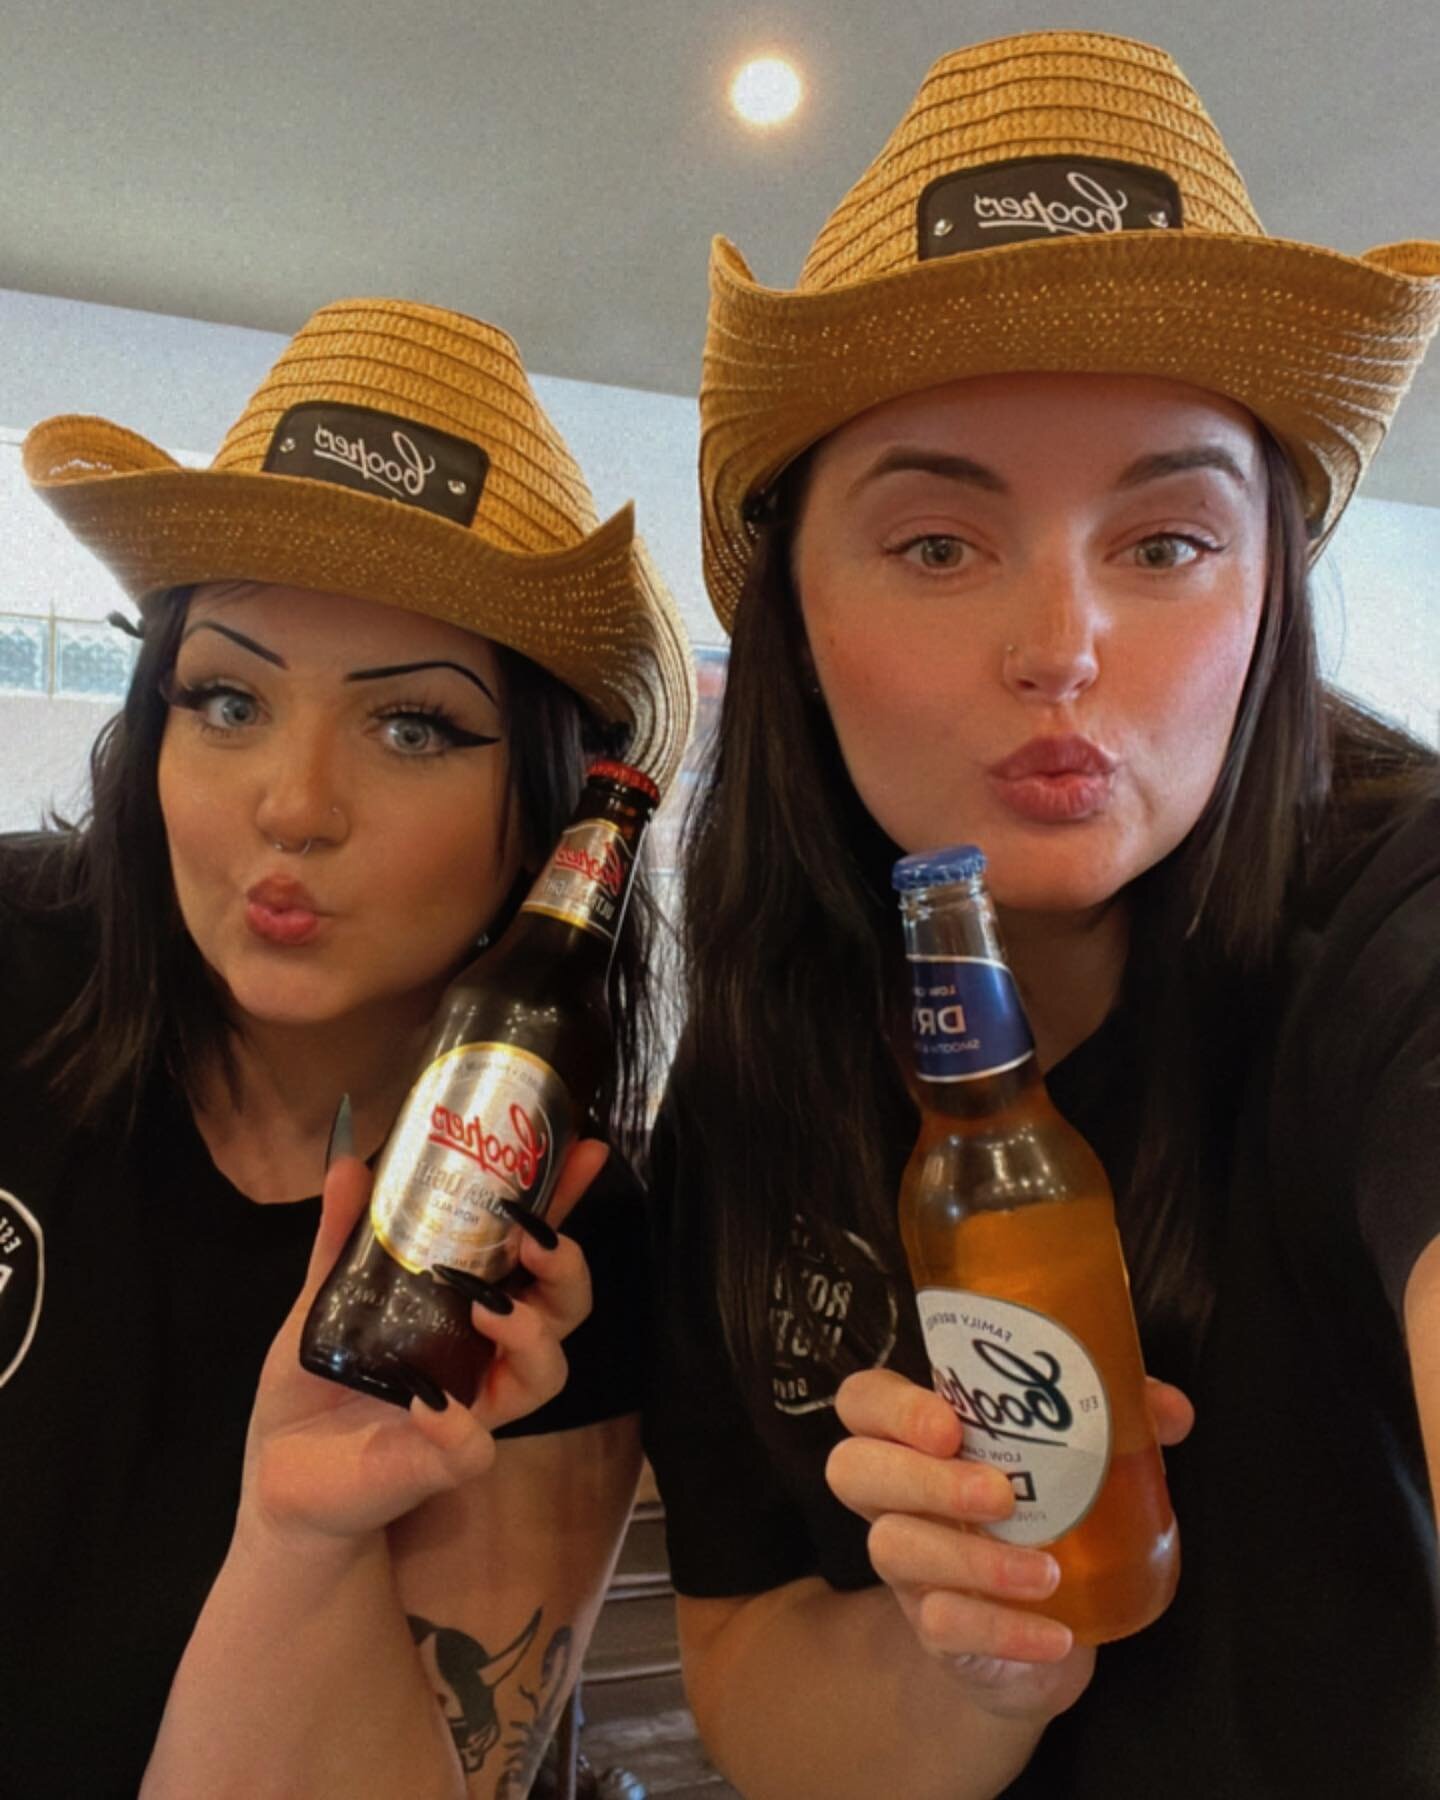 Howdy howdy! Join us this Australia Day and score yourself this hat with any 4x coopers stubbies/schooners purchased! #australiaday #coopers